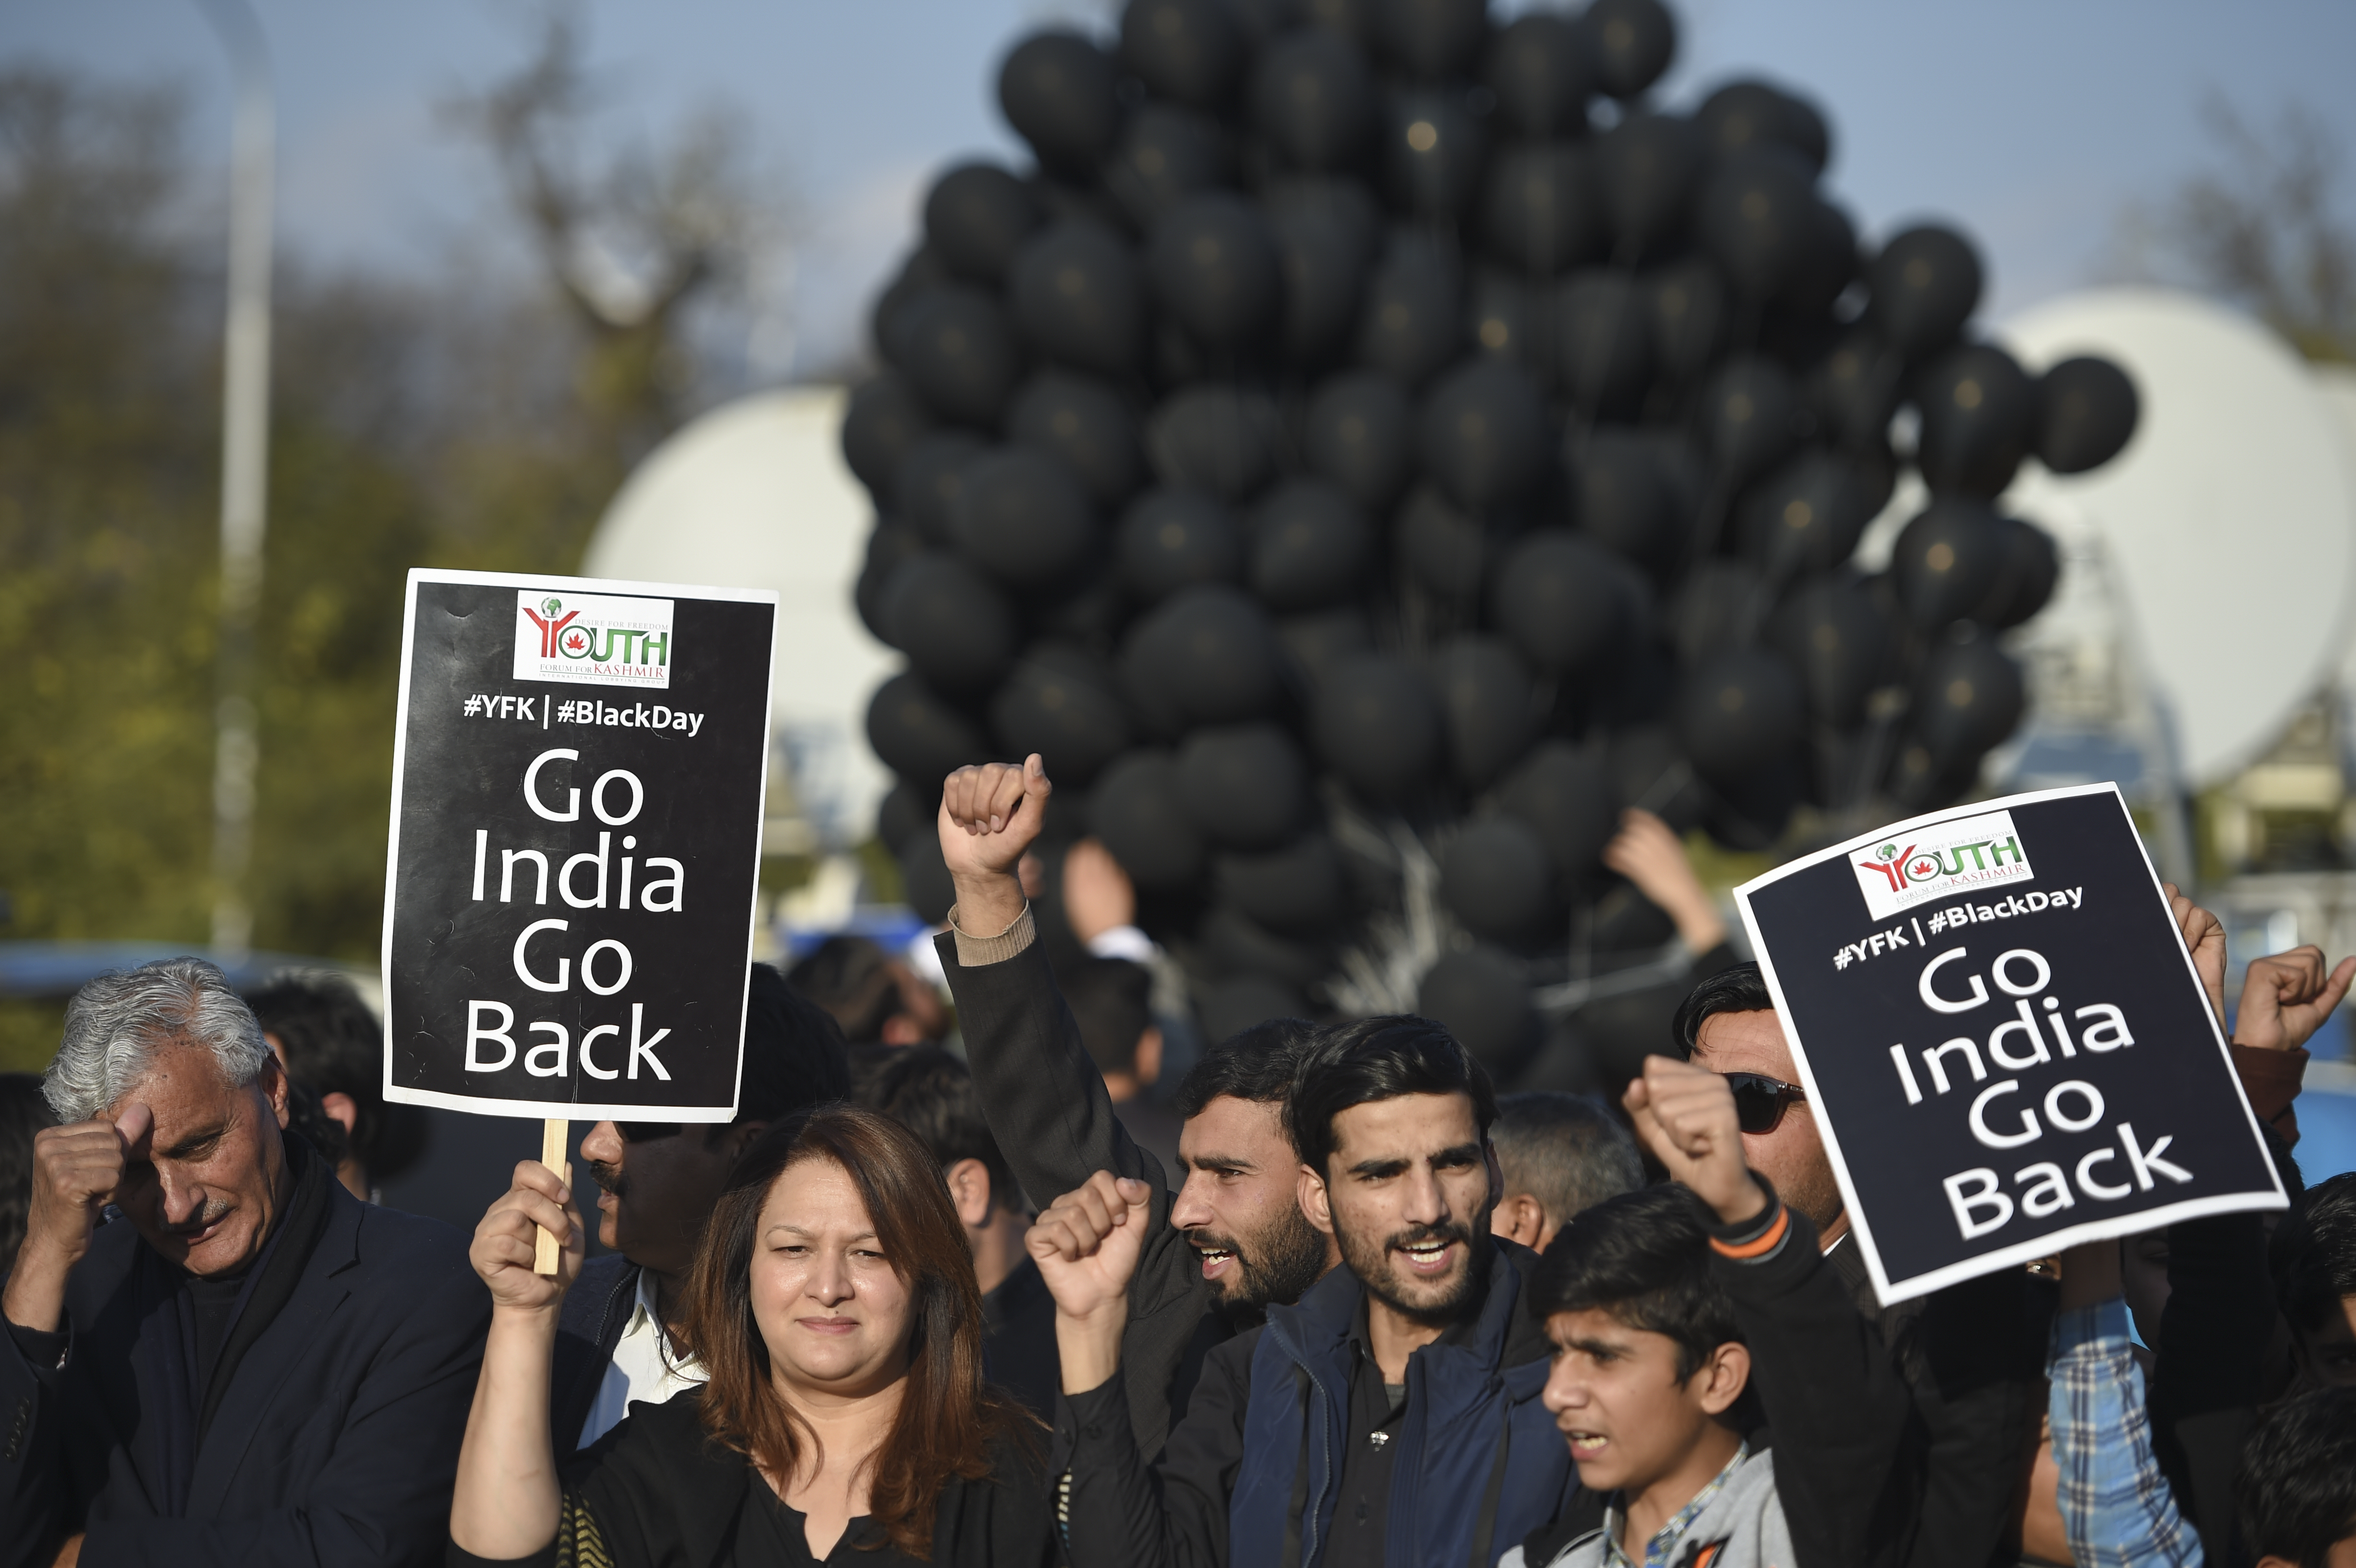 Members of Youth Forum For Kashmir take part in an anti-India demonstration in Islamabad on January 26, 2020.